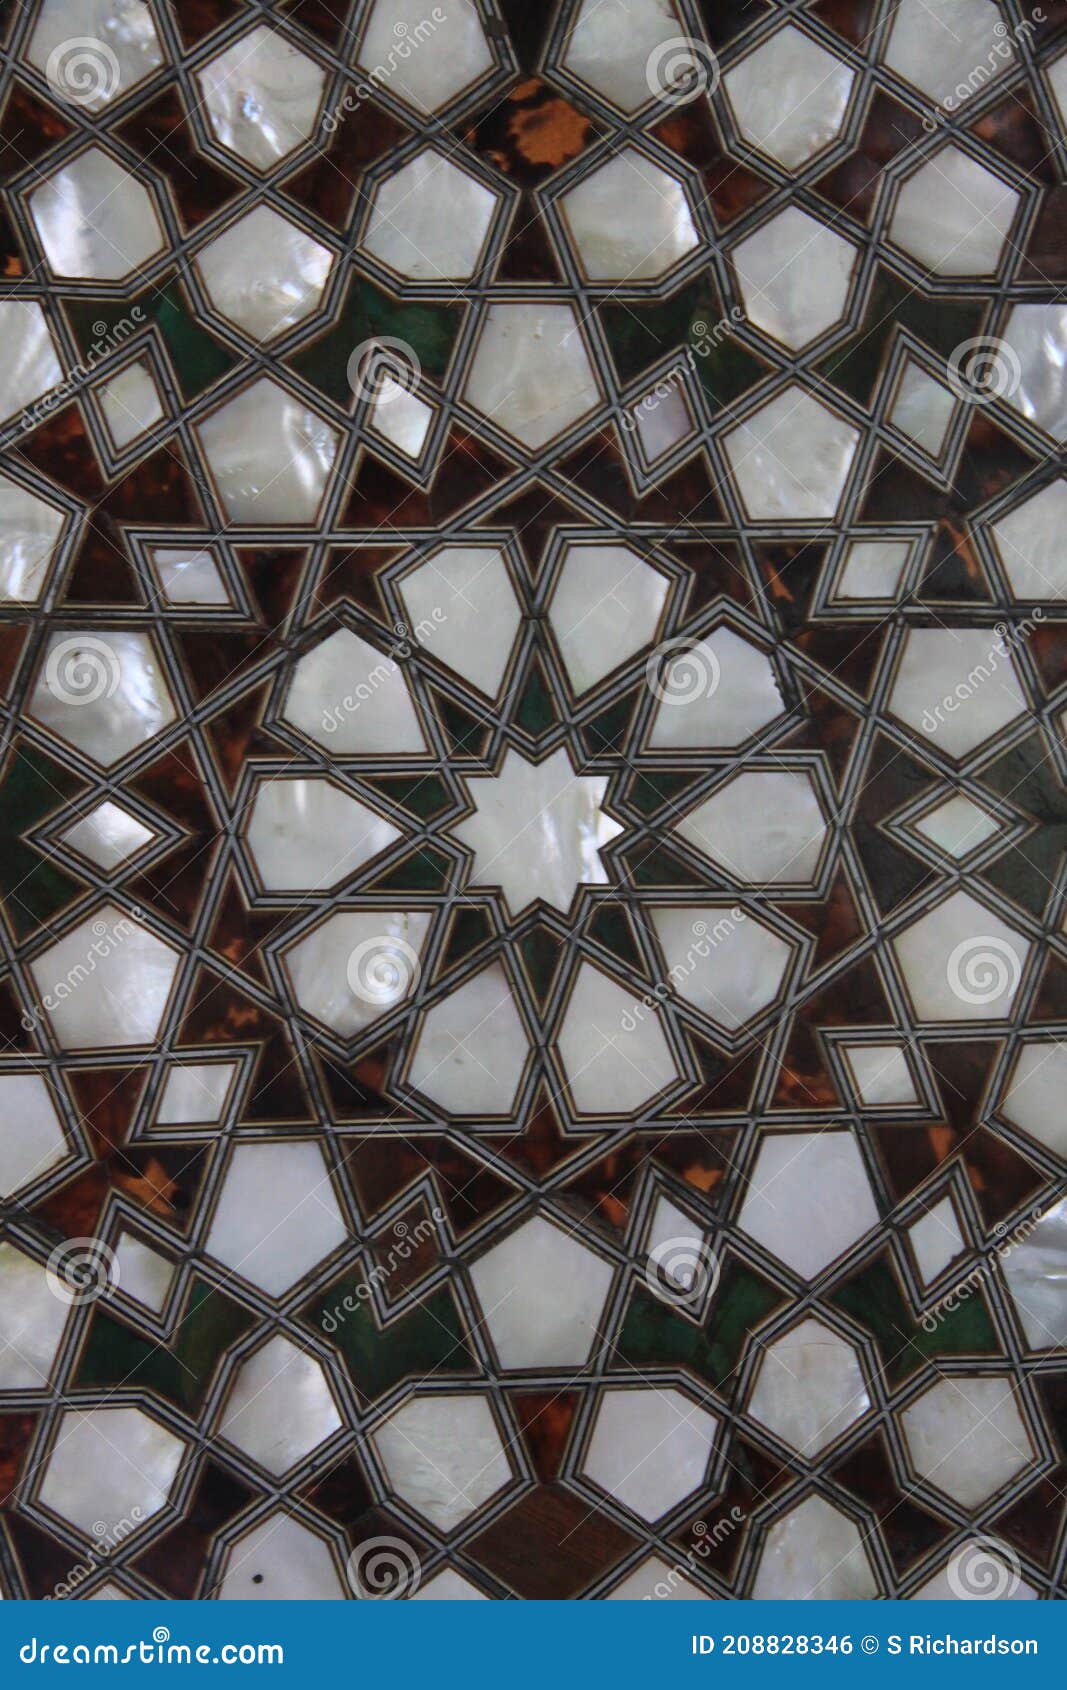 mother of pearl and tortoiseshell ceiling of the topkapi palace